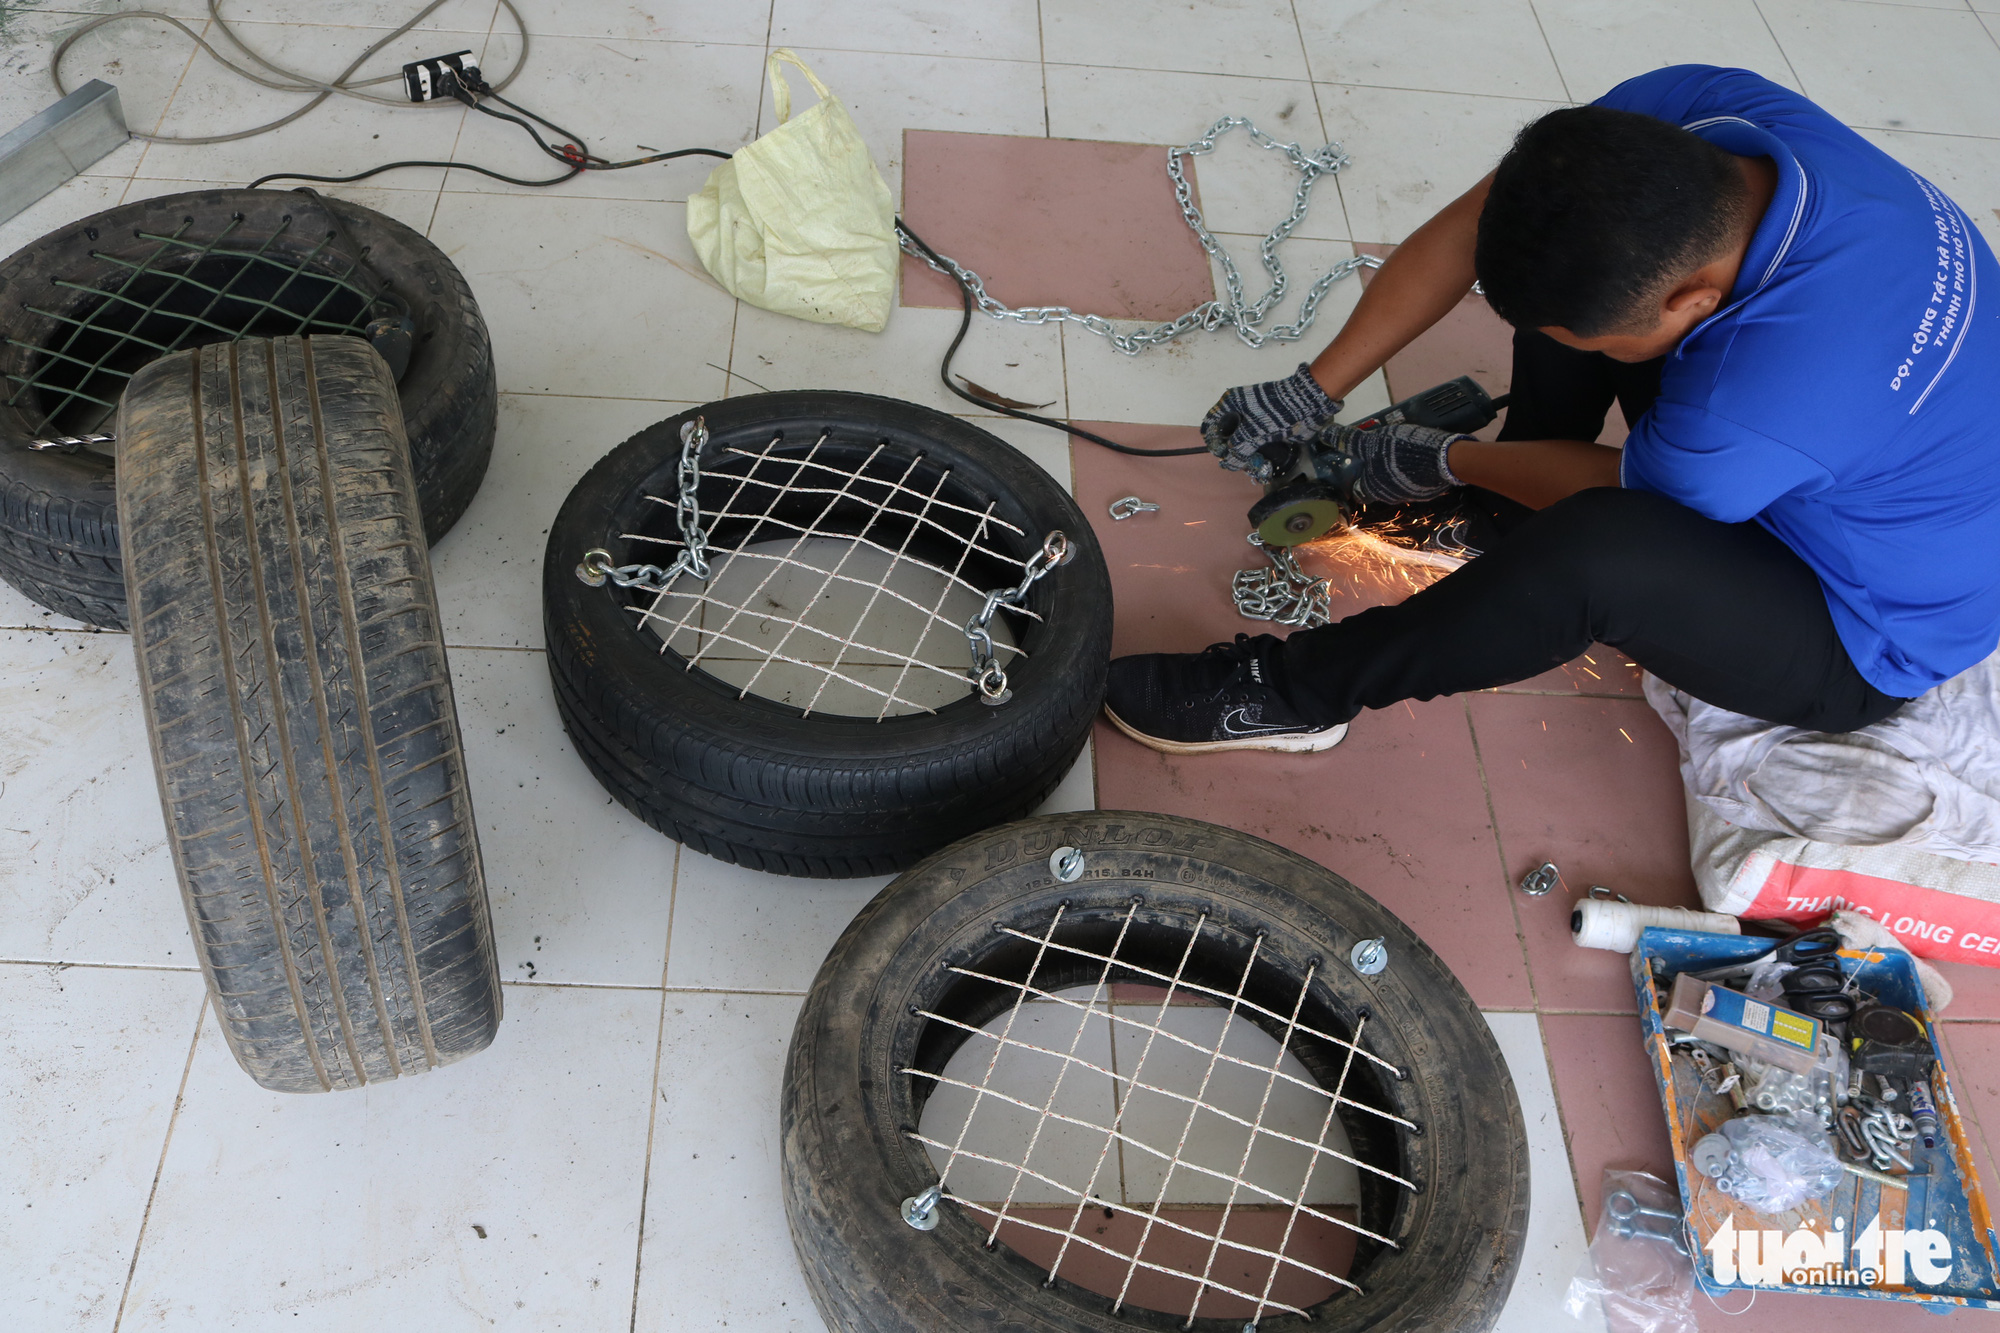 Le Quang Phu, 23, installs metal chains on old car tires to make swings for a playground in Nha Be District, Ho Chi Minh City, Vietnam. Photo: Hoang An / Tuoi Tre